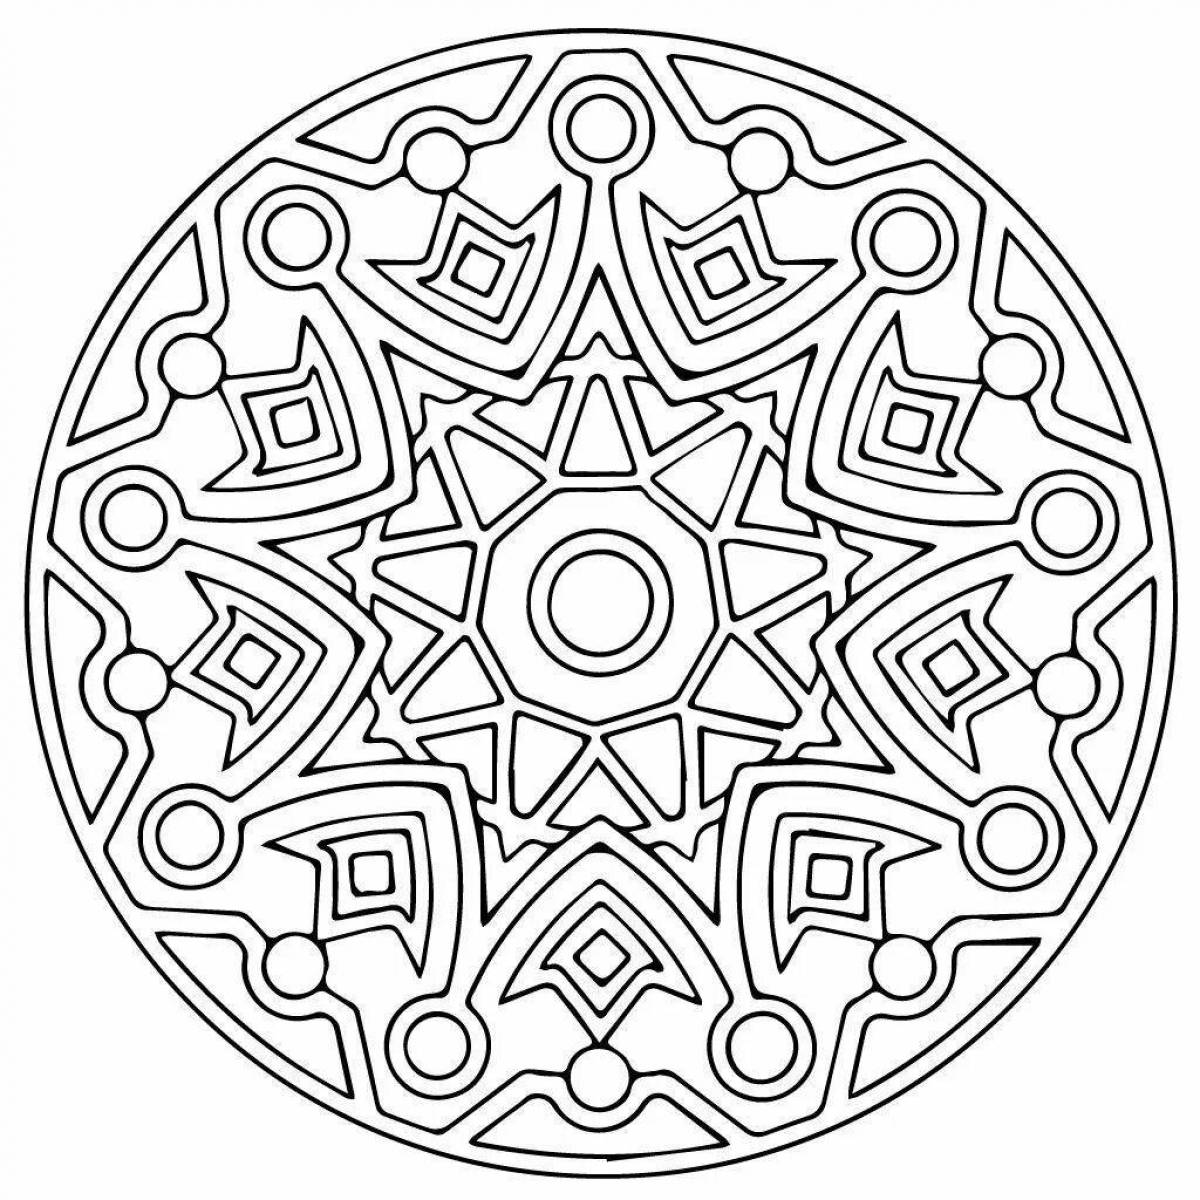 Fine plate coloring page